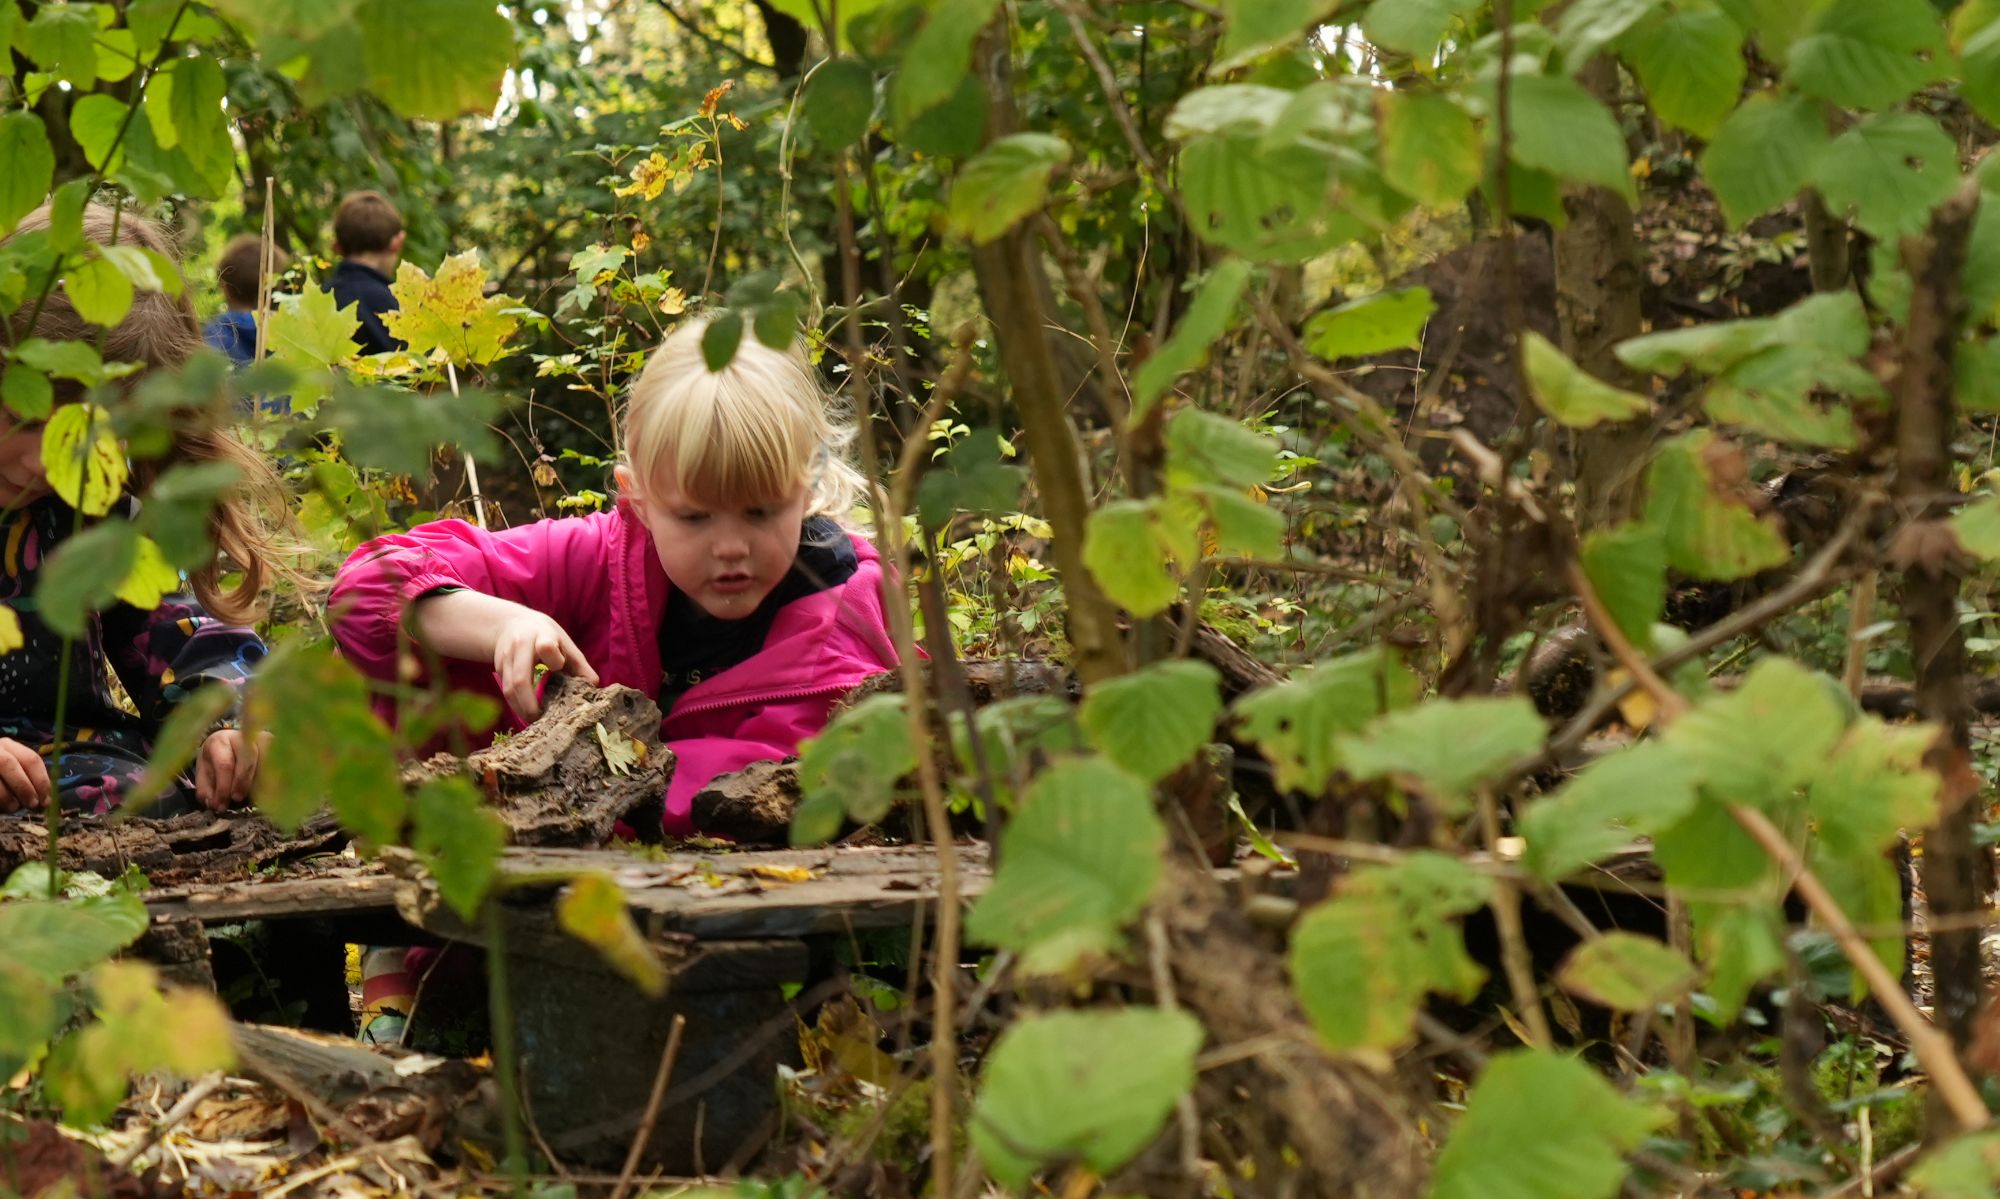 A little girl crouched down exploring nature and wildlife.